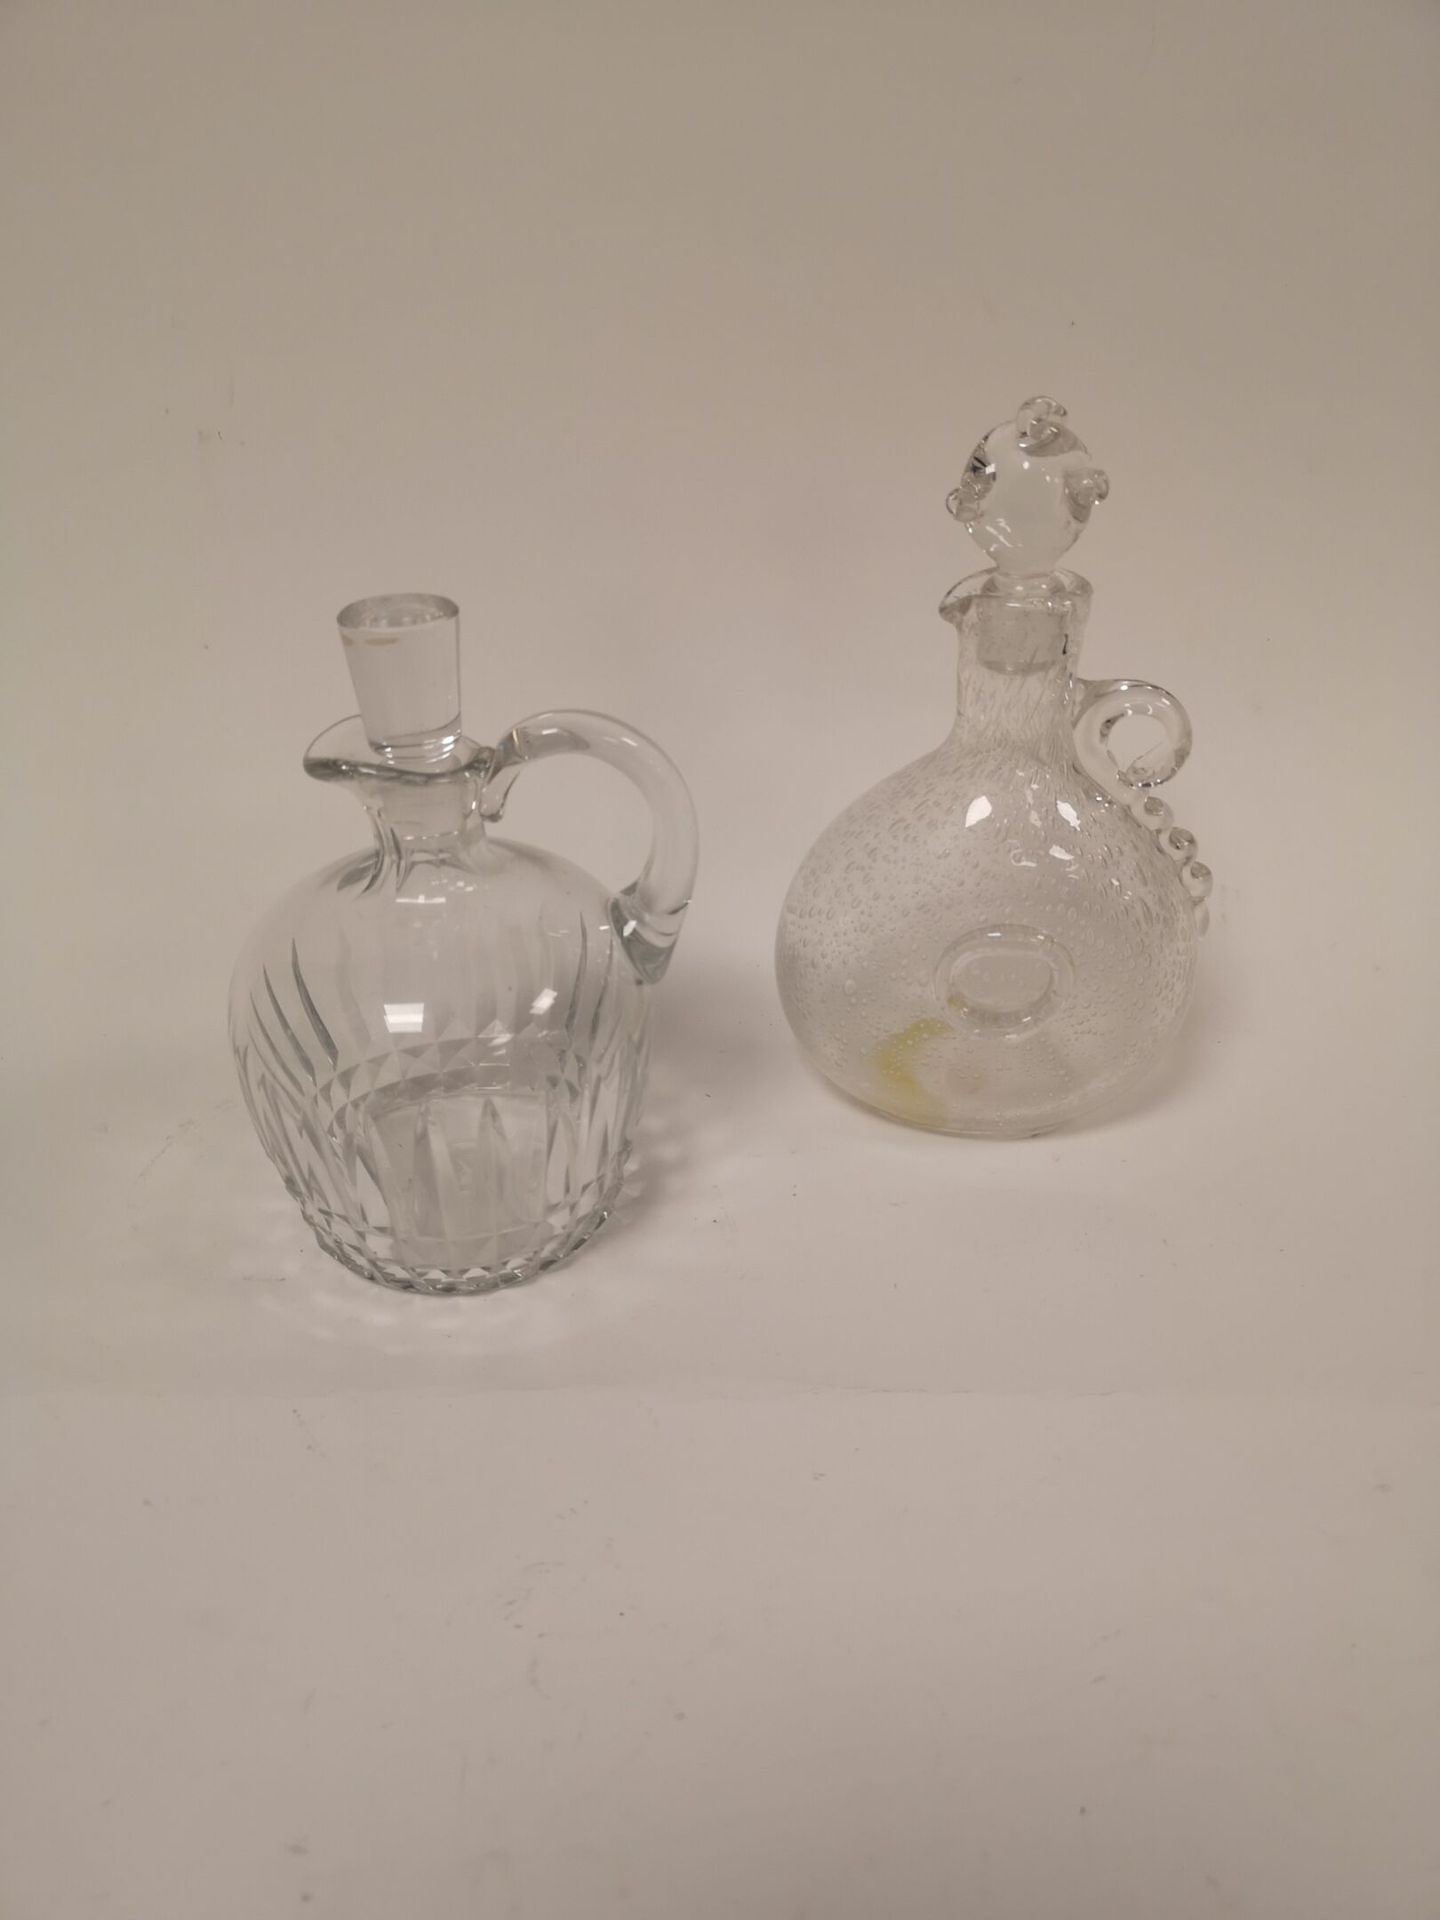 Null Two carafons out of colorless glass :

- one bubbled of MURANO, with medall&hellip;